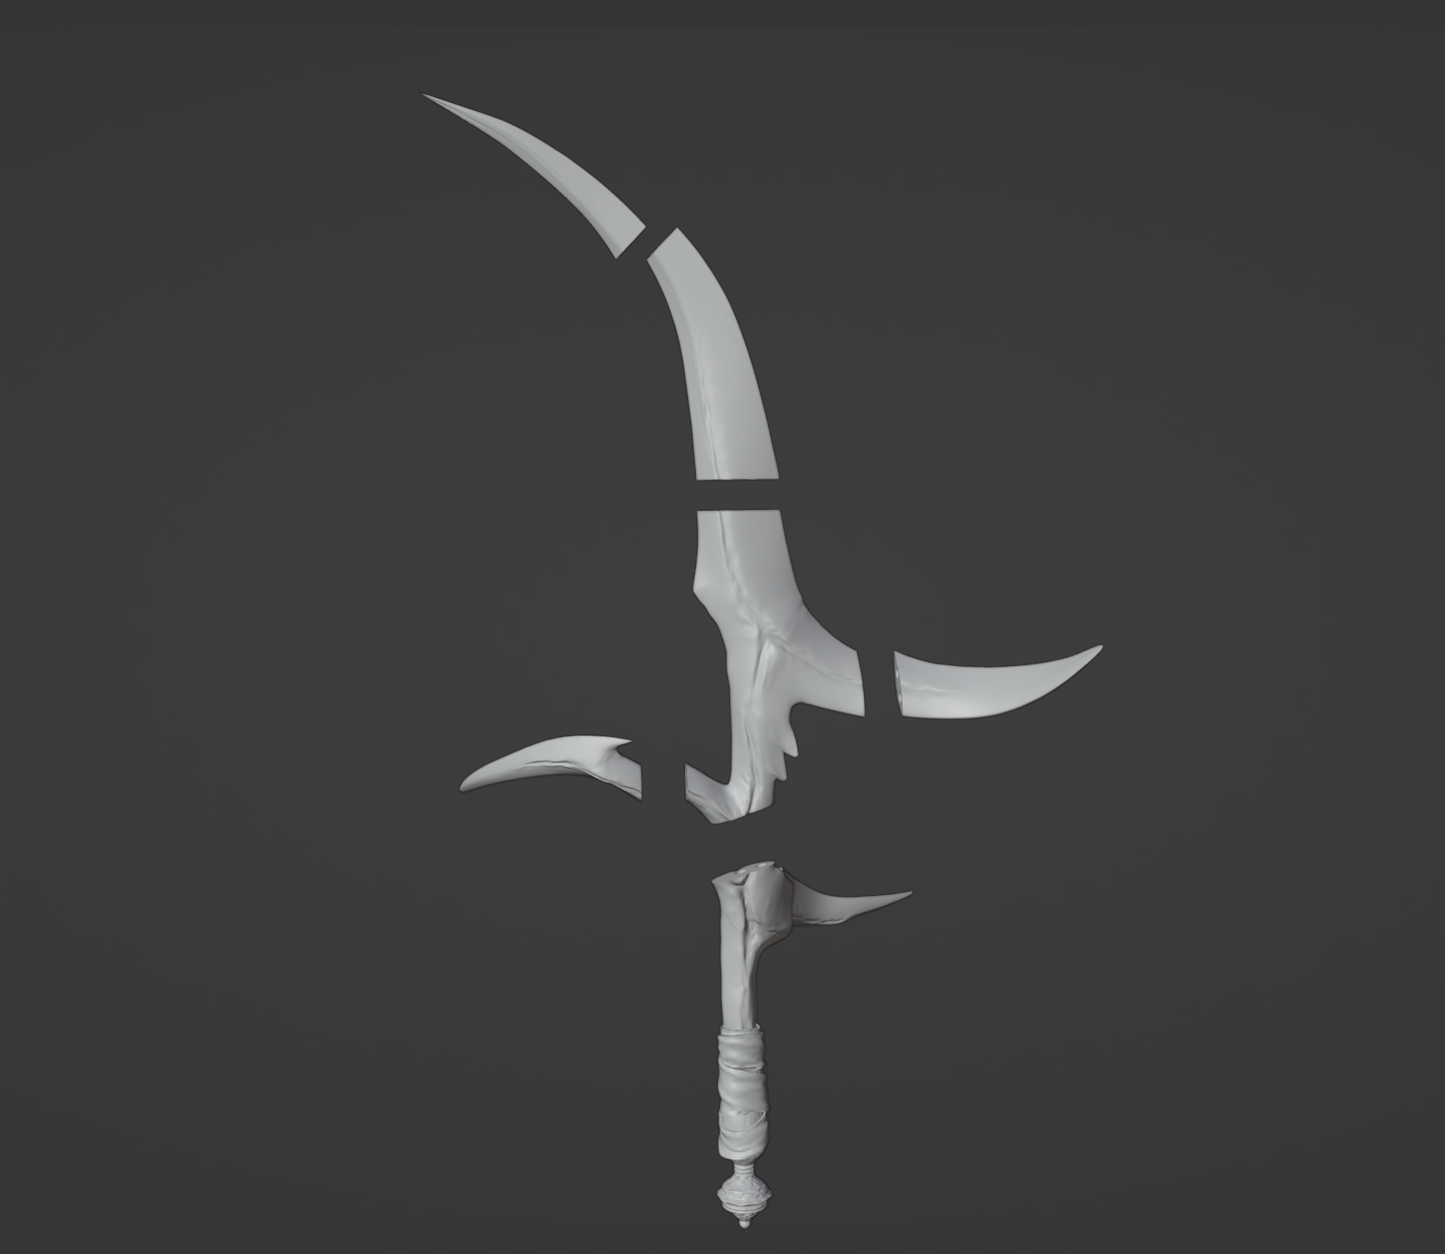 Black Knife - Digital 3D Model Files and Physical 3D Printed Kit Options